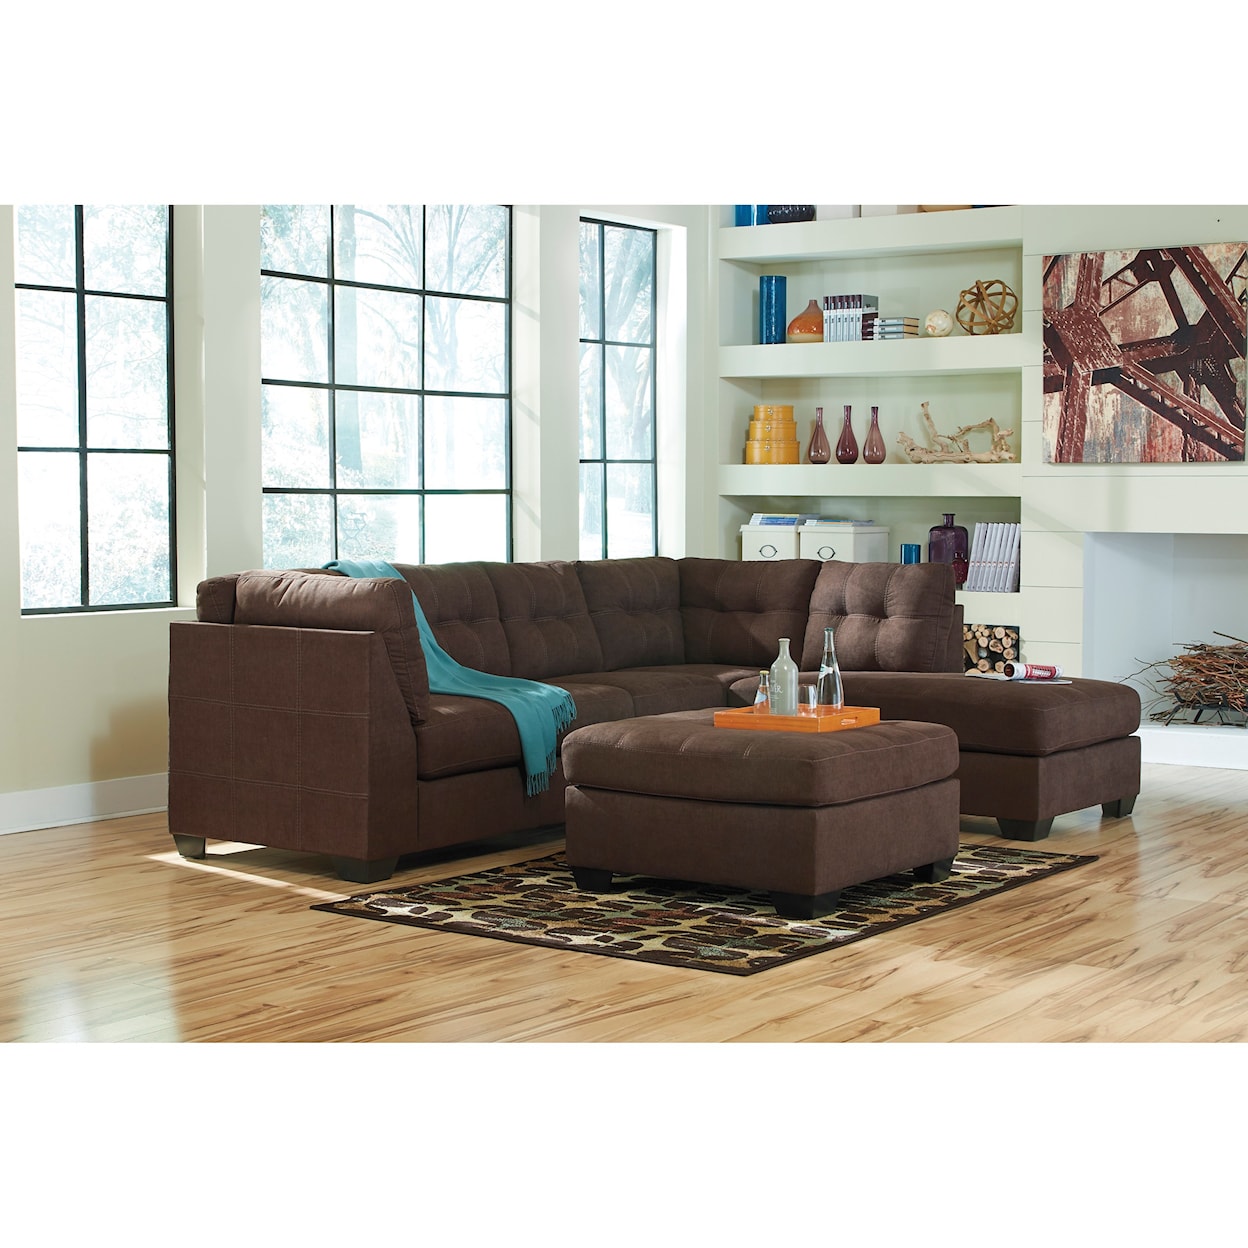 JB King Maier 2-Piece Sectional with Chaise